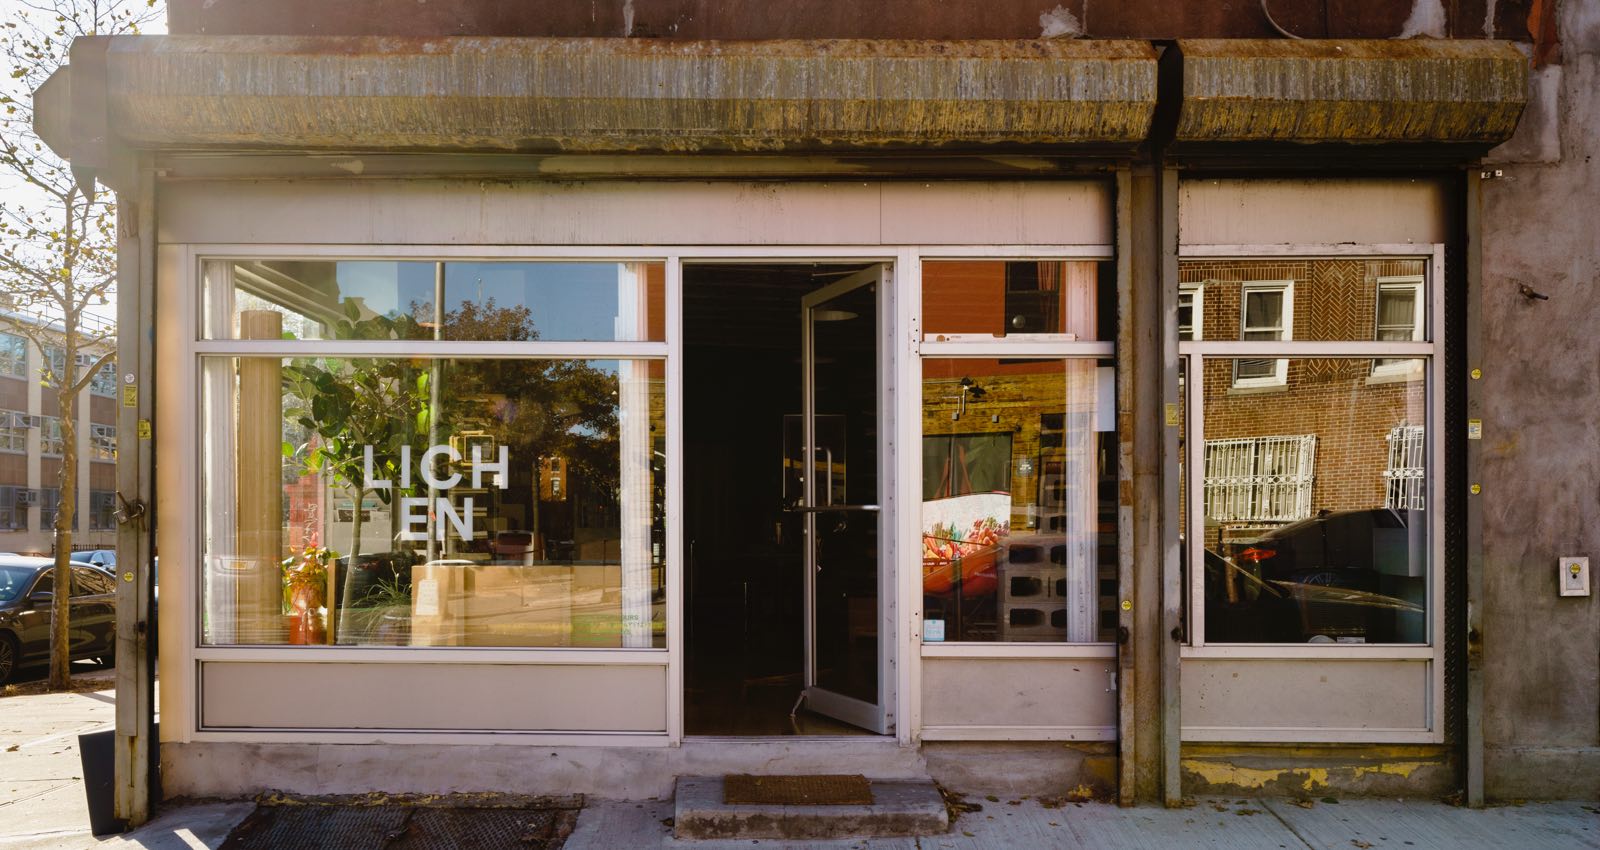 Outside street view of the Brooklyn-based Lichen store.